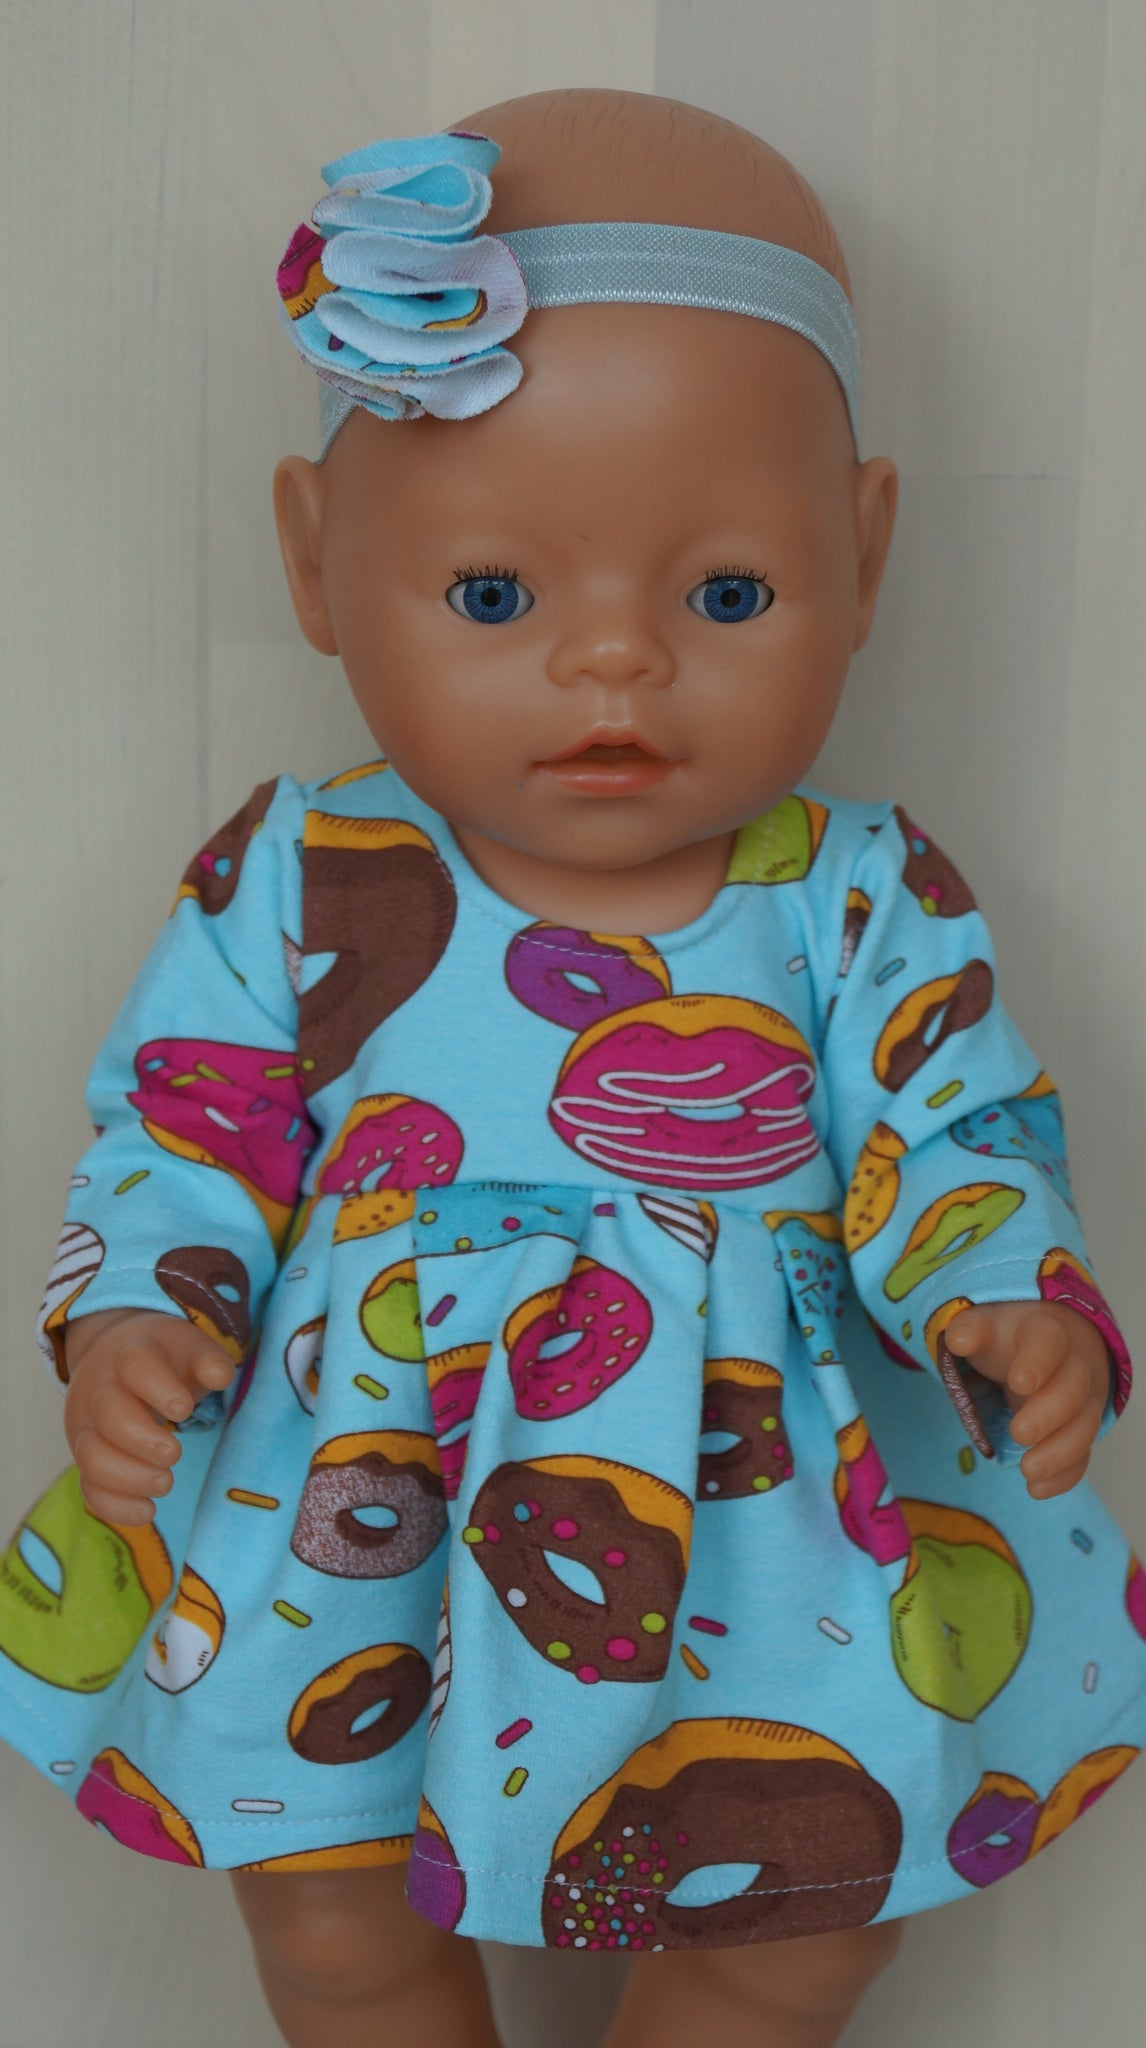 baby born sister doll clothes